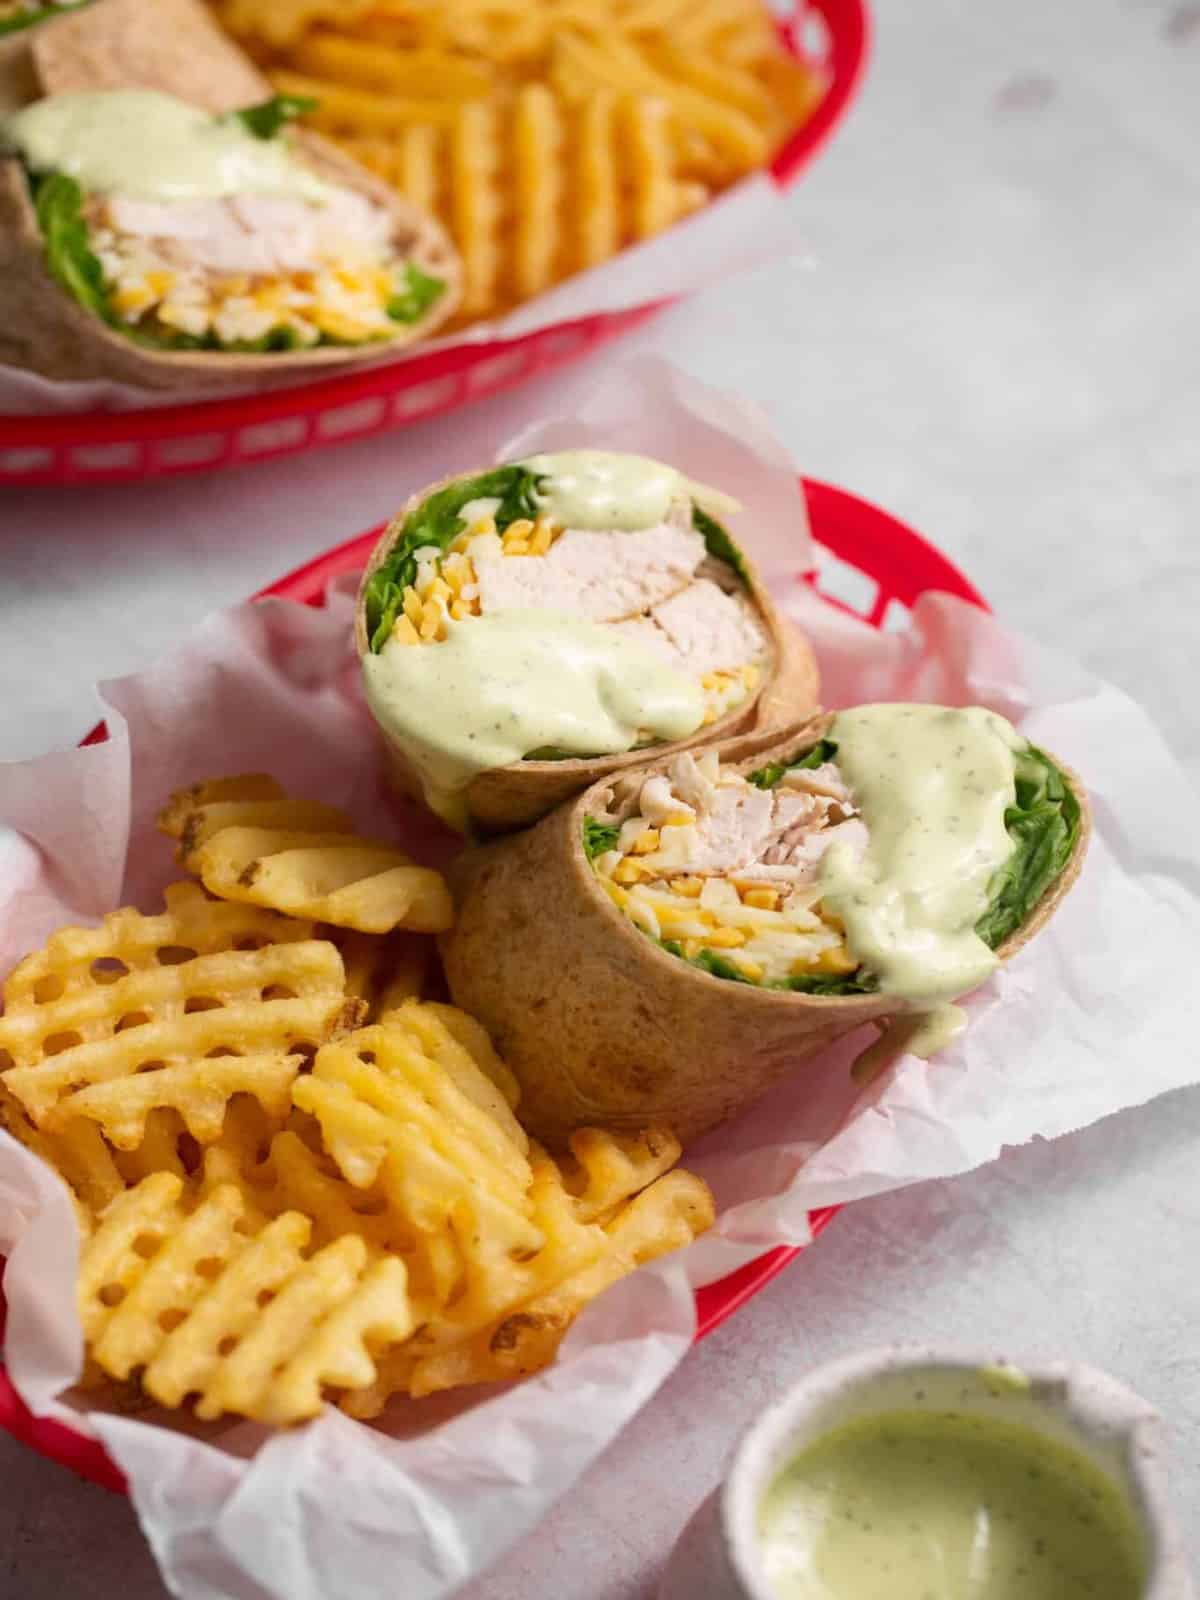 Chick-fil-a grilled chicken cool wraps drizzled with avocado lime ranch dressing and fries in a red basket.